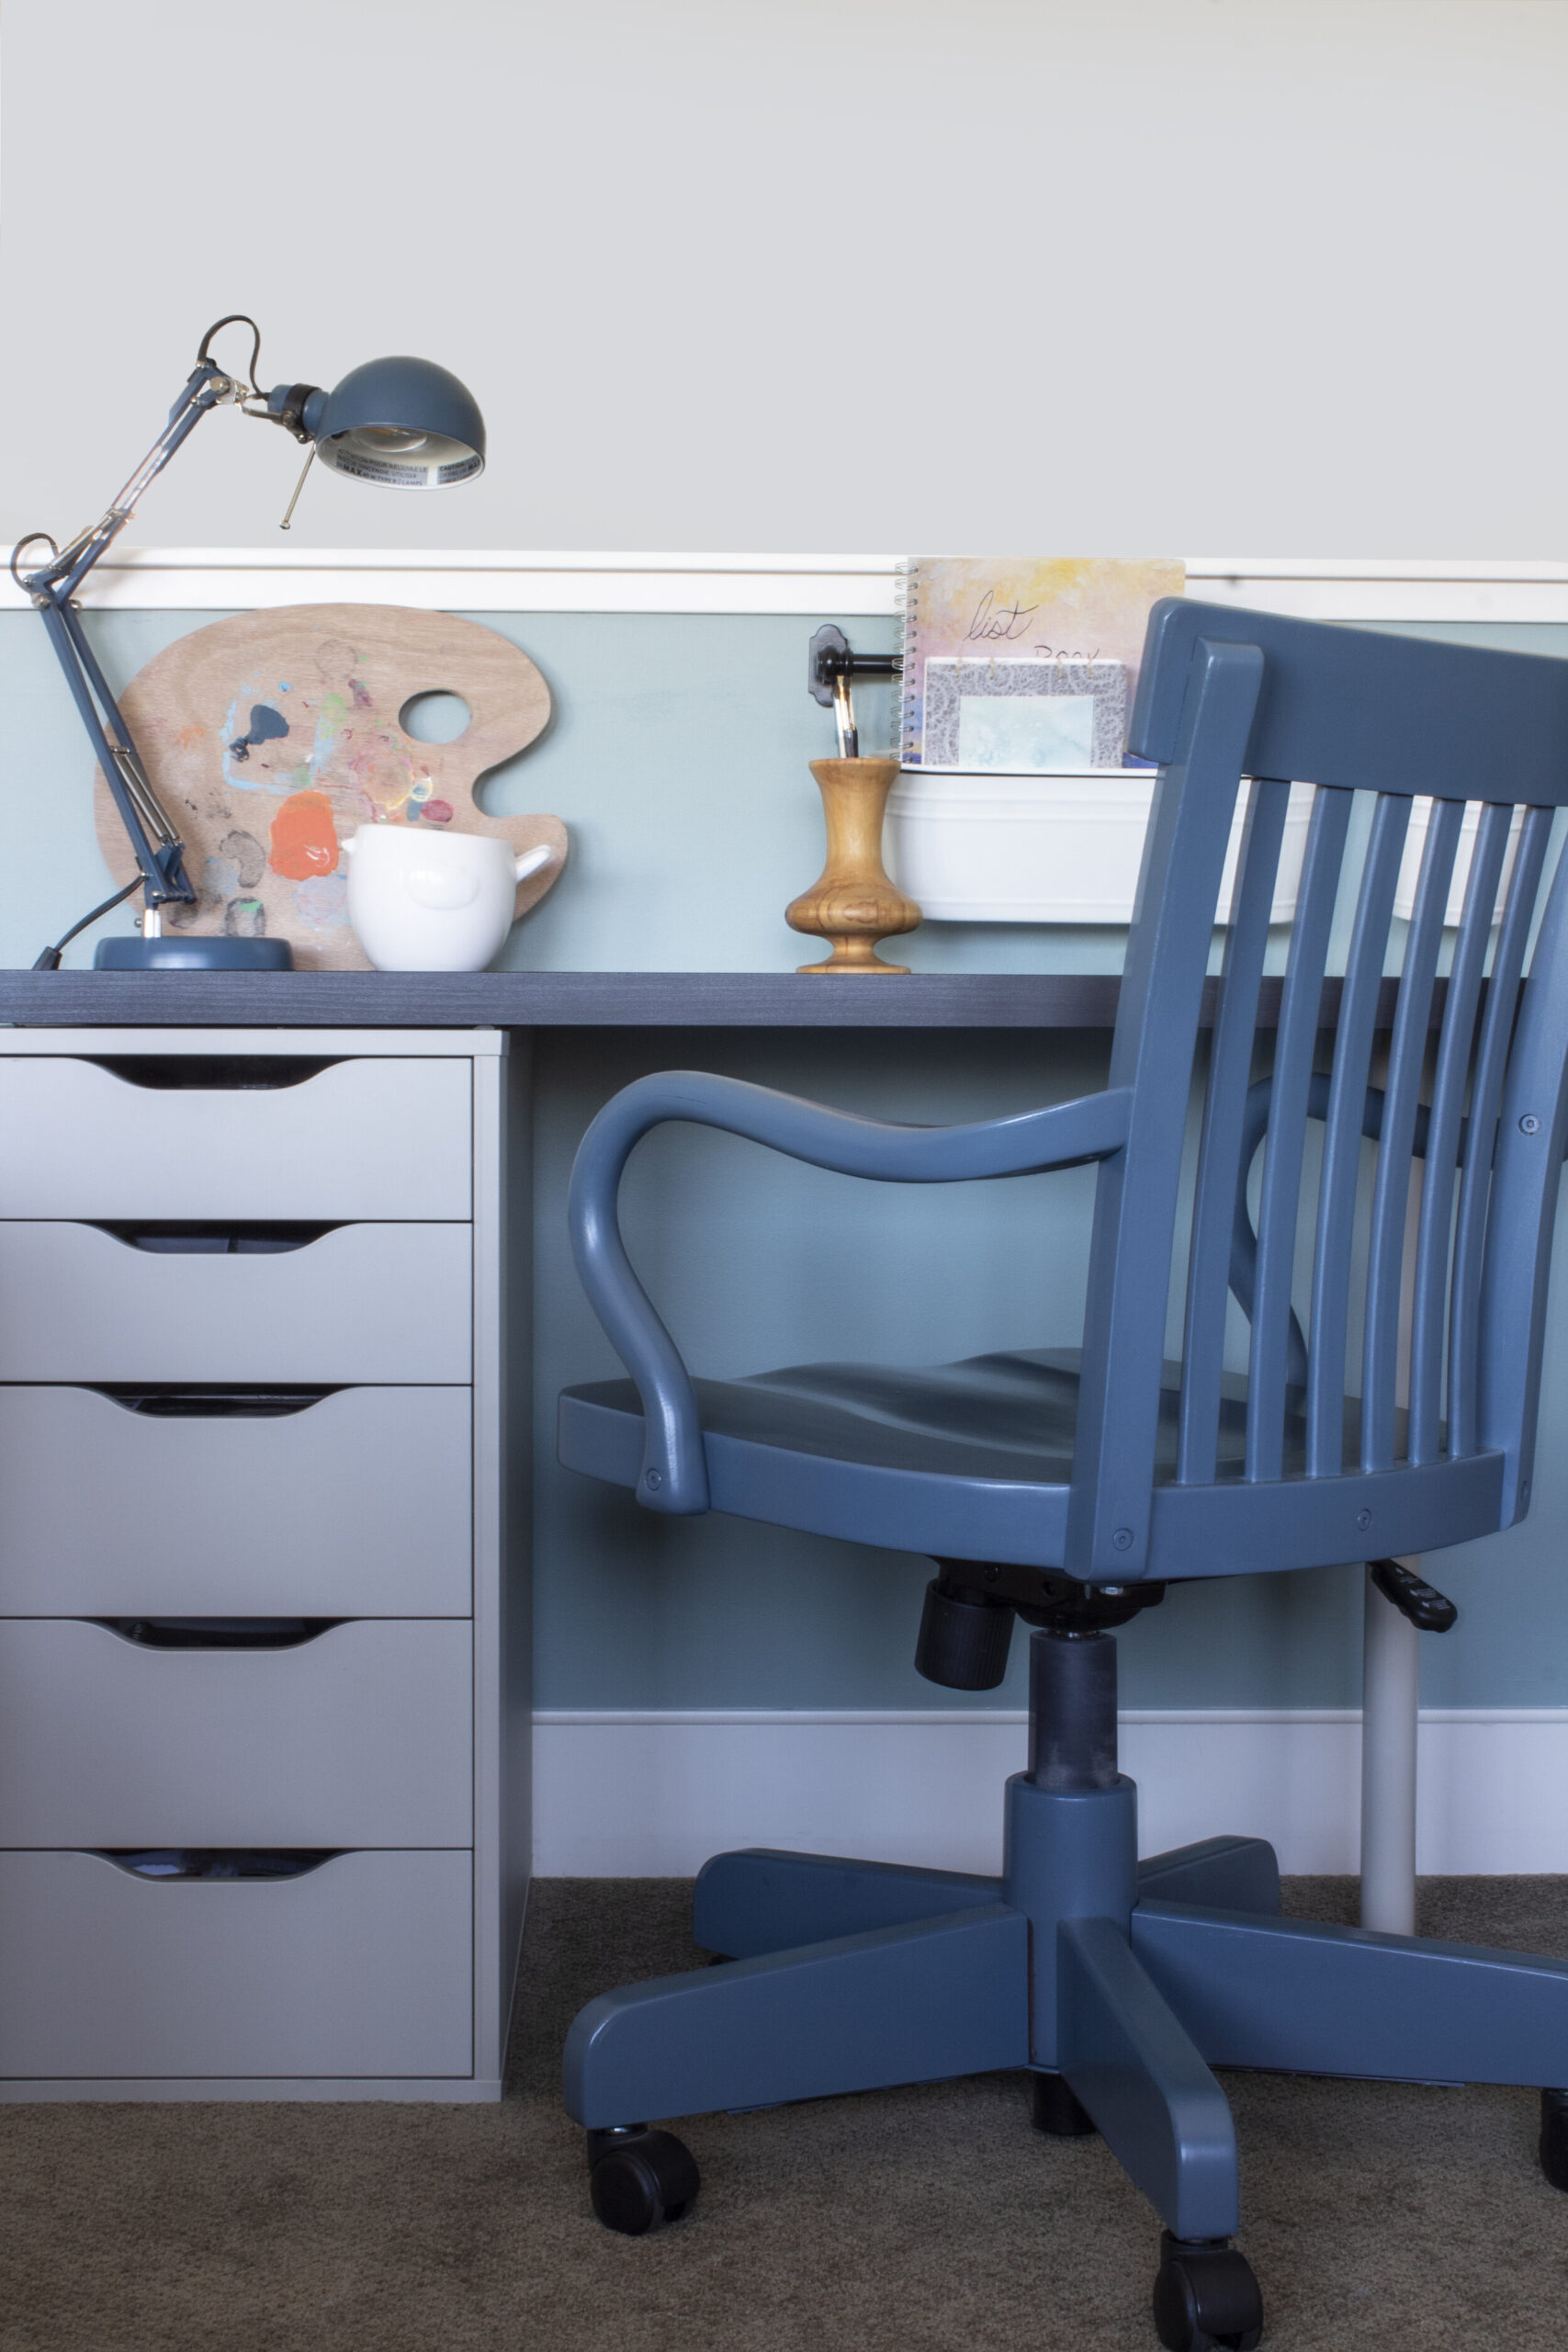 Desk with a blue painted chair, art supplies on des